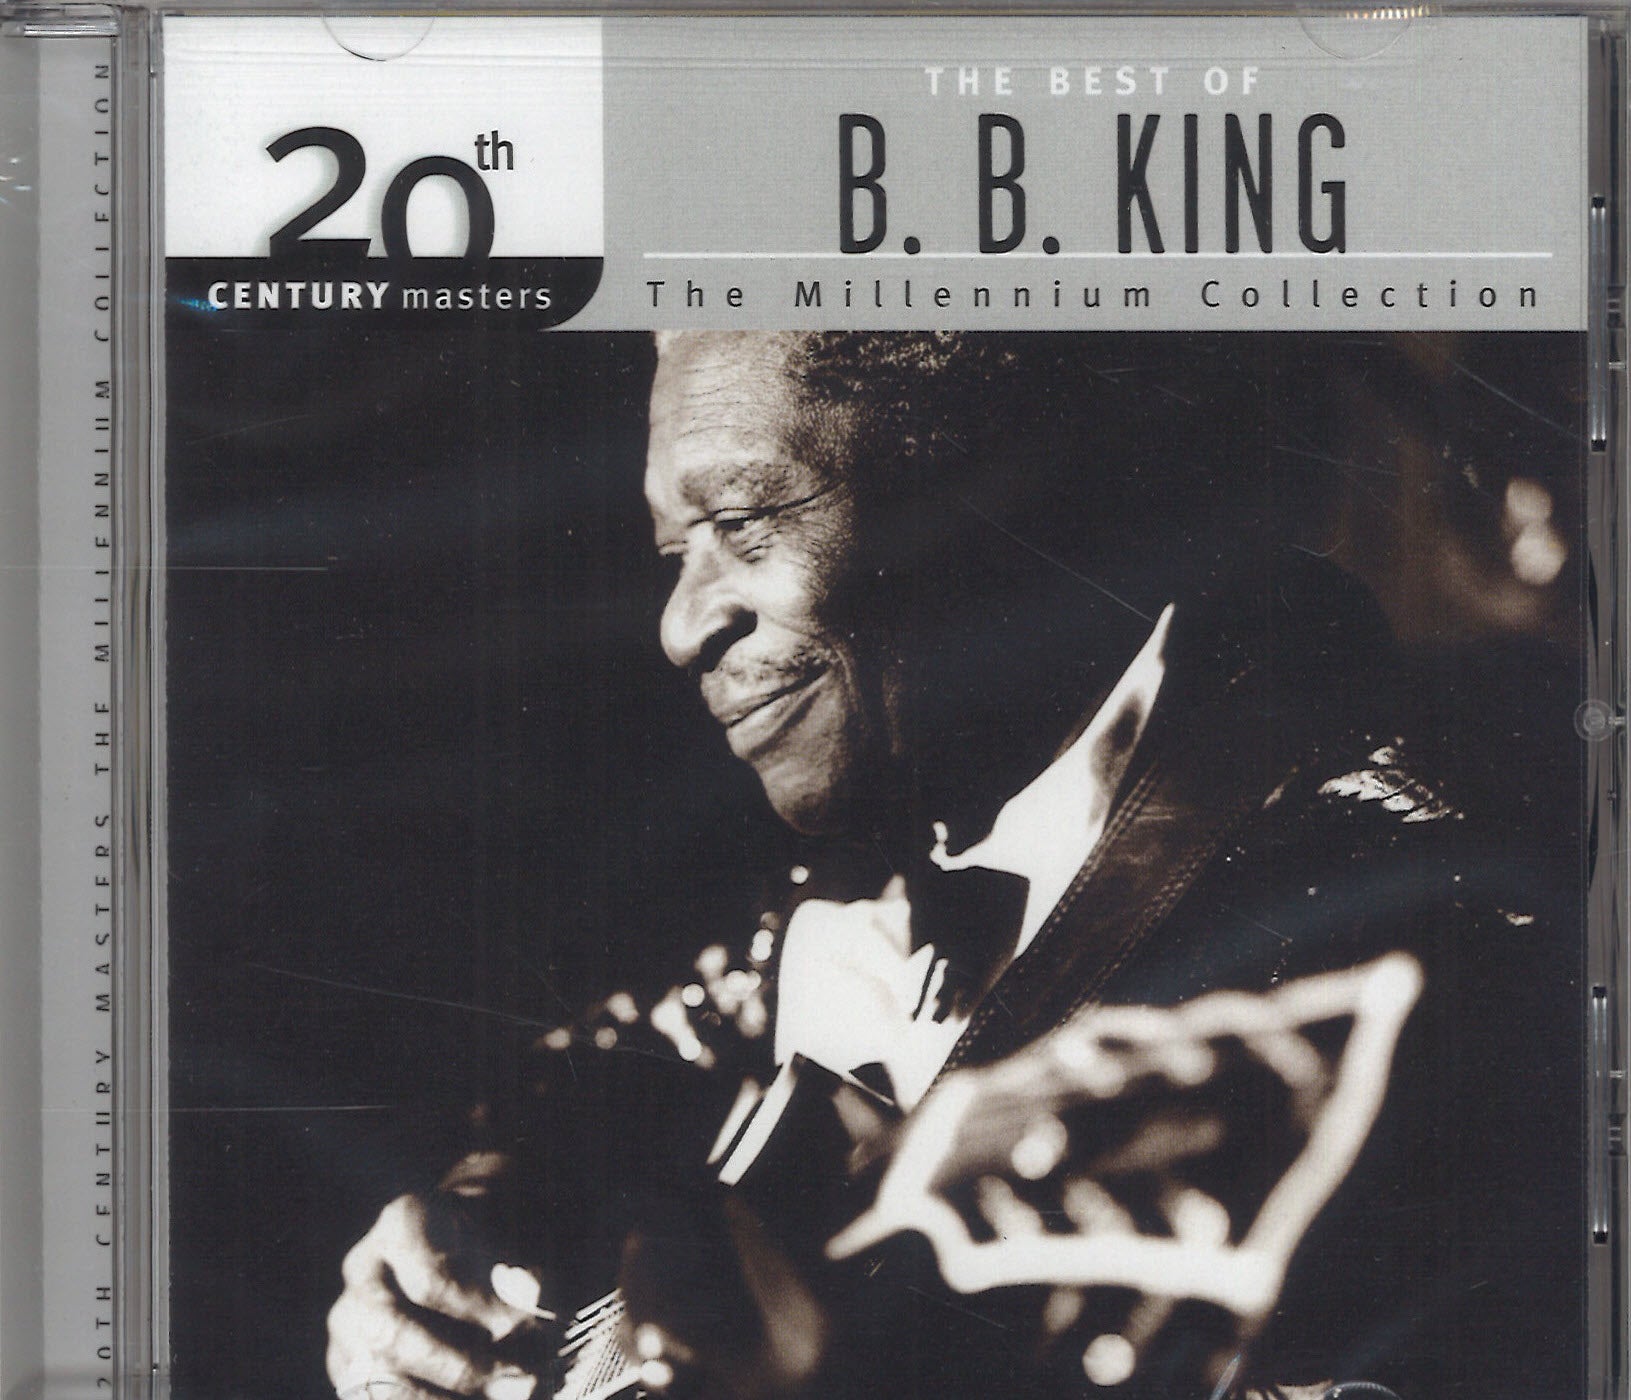 B.B. King The Millennium Collection